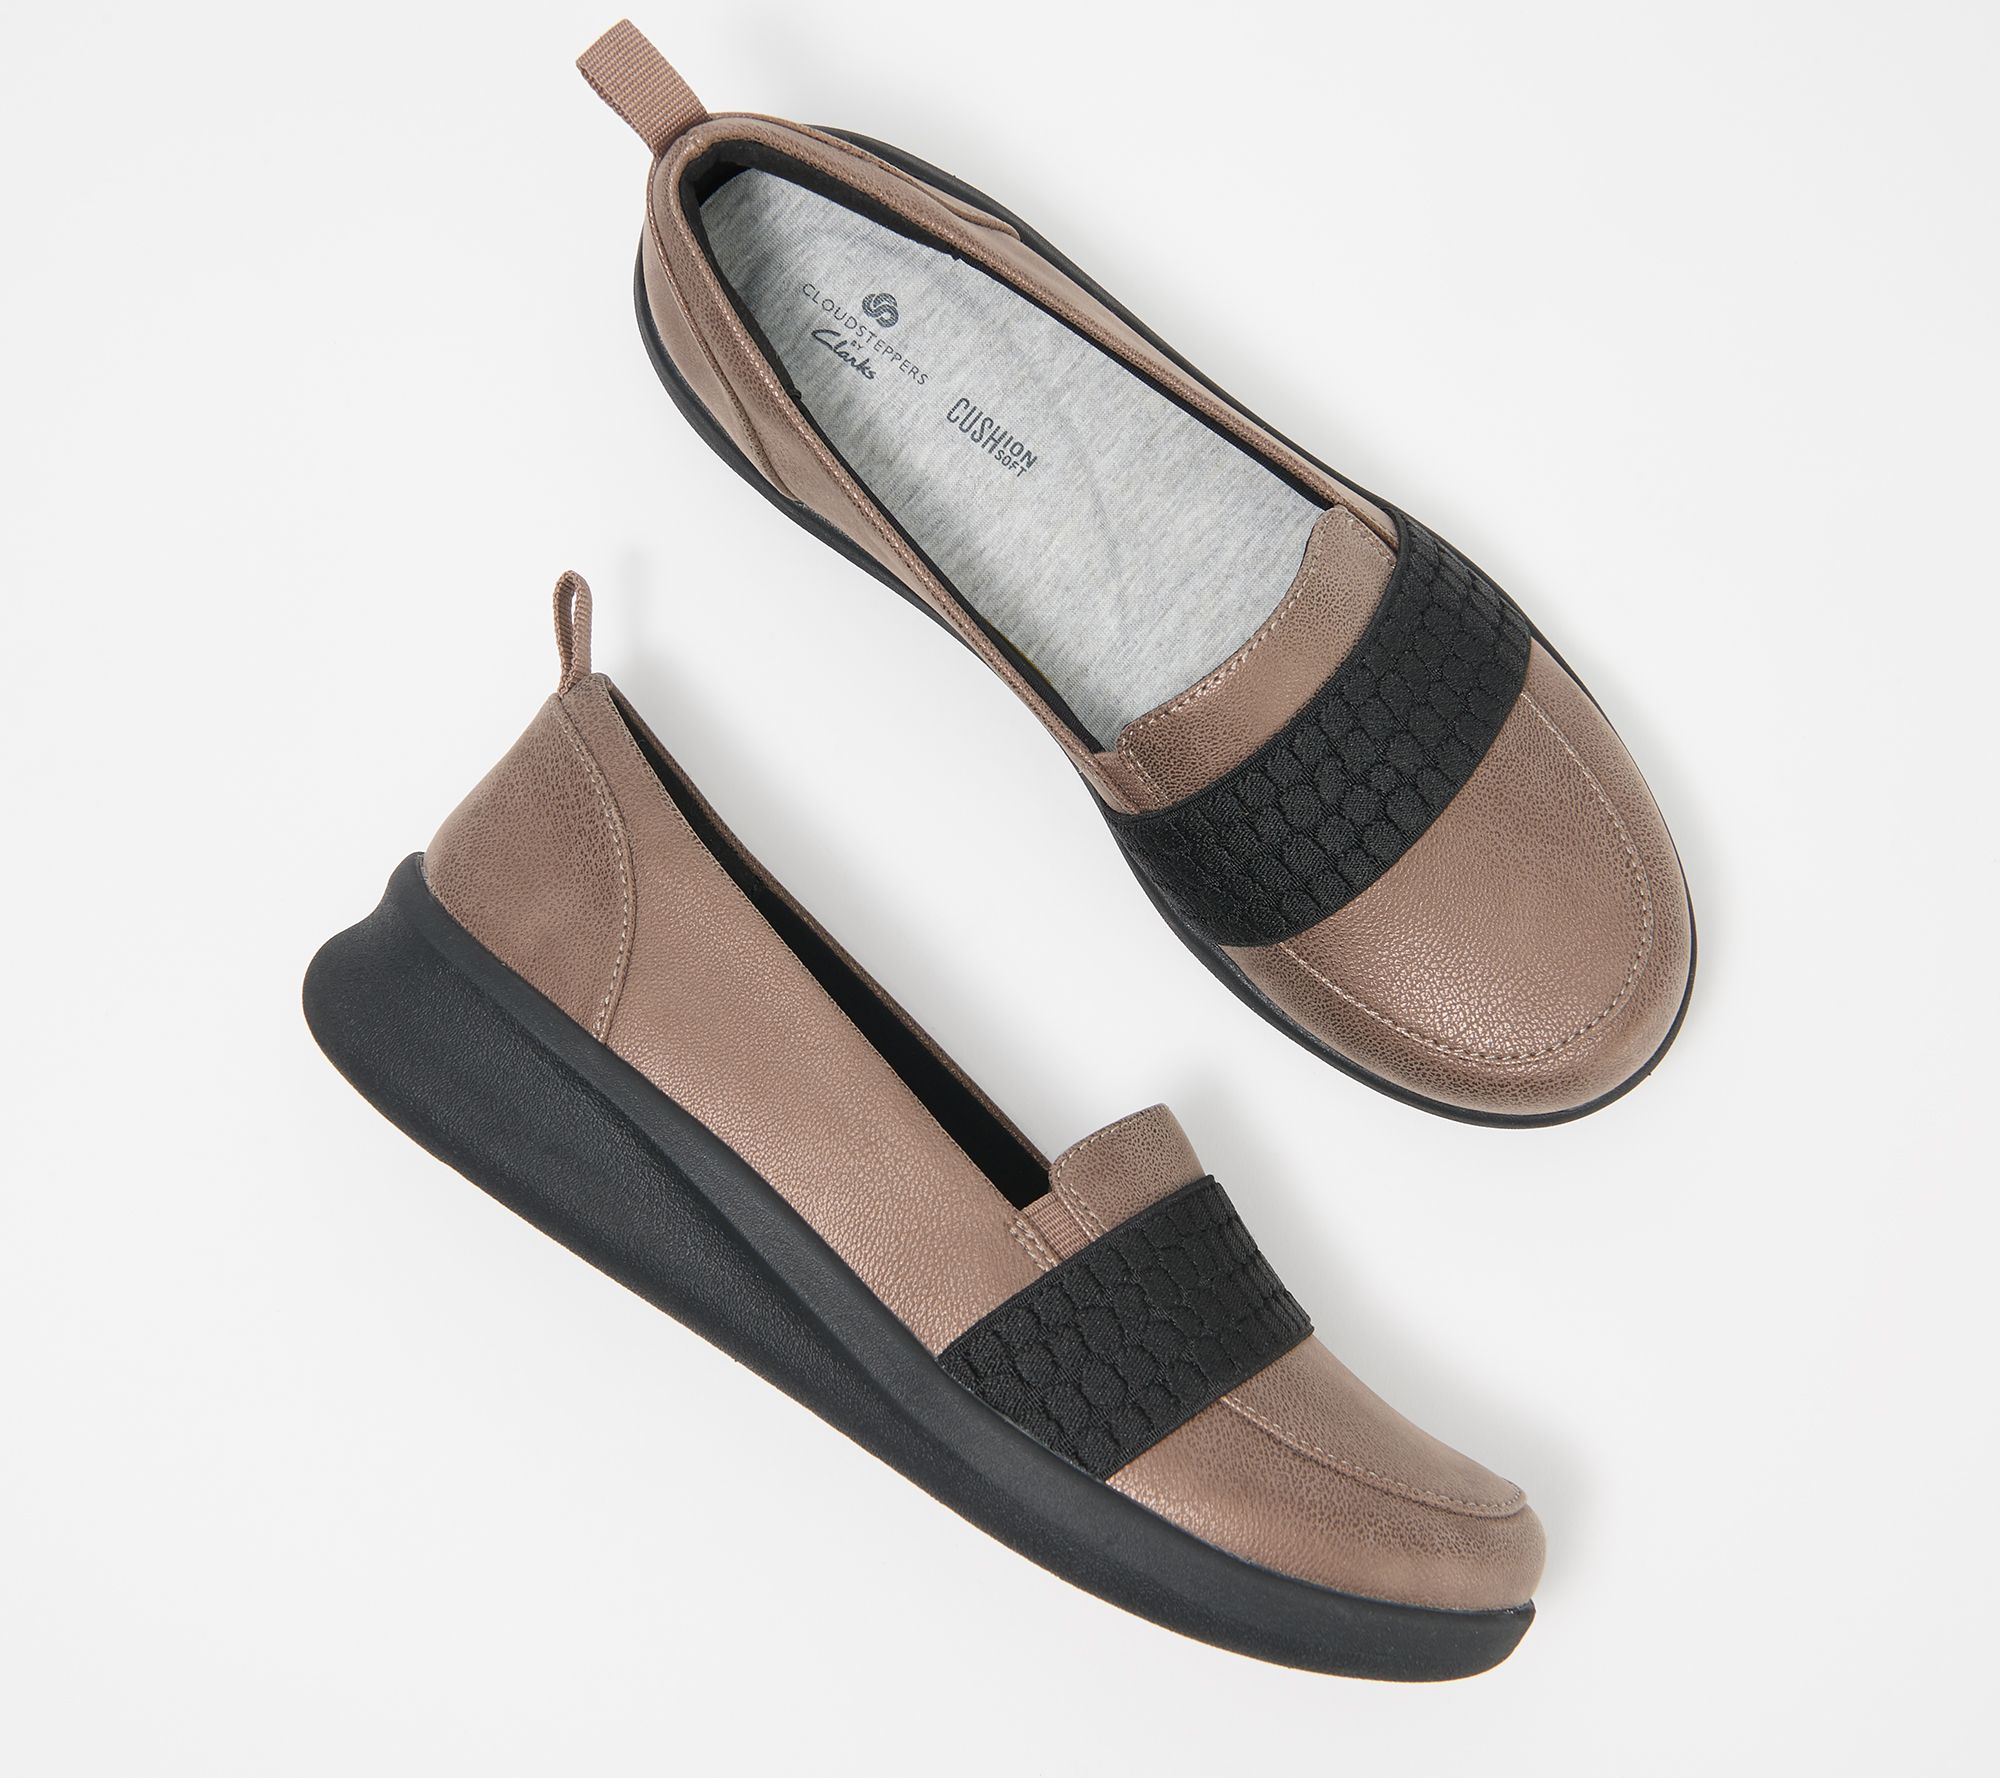 CLOUDSTEPPERS by Clarks Slip-on Loafers 